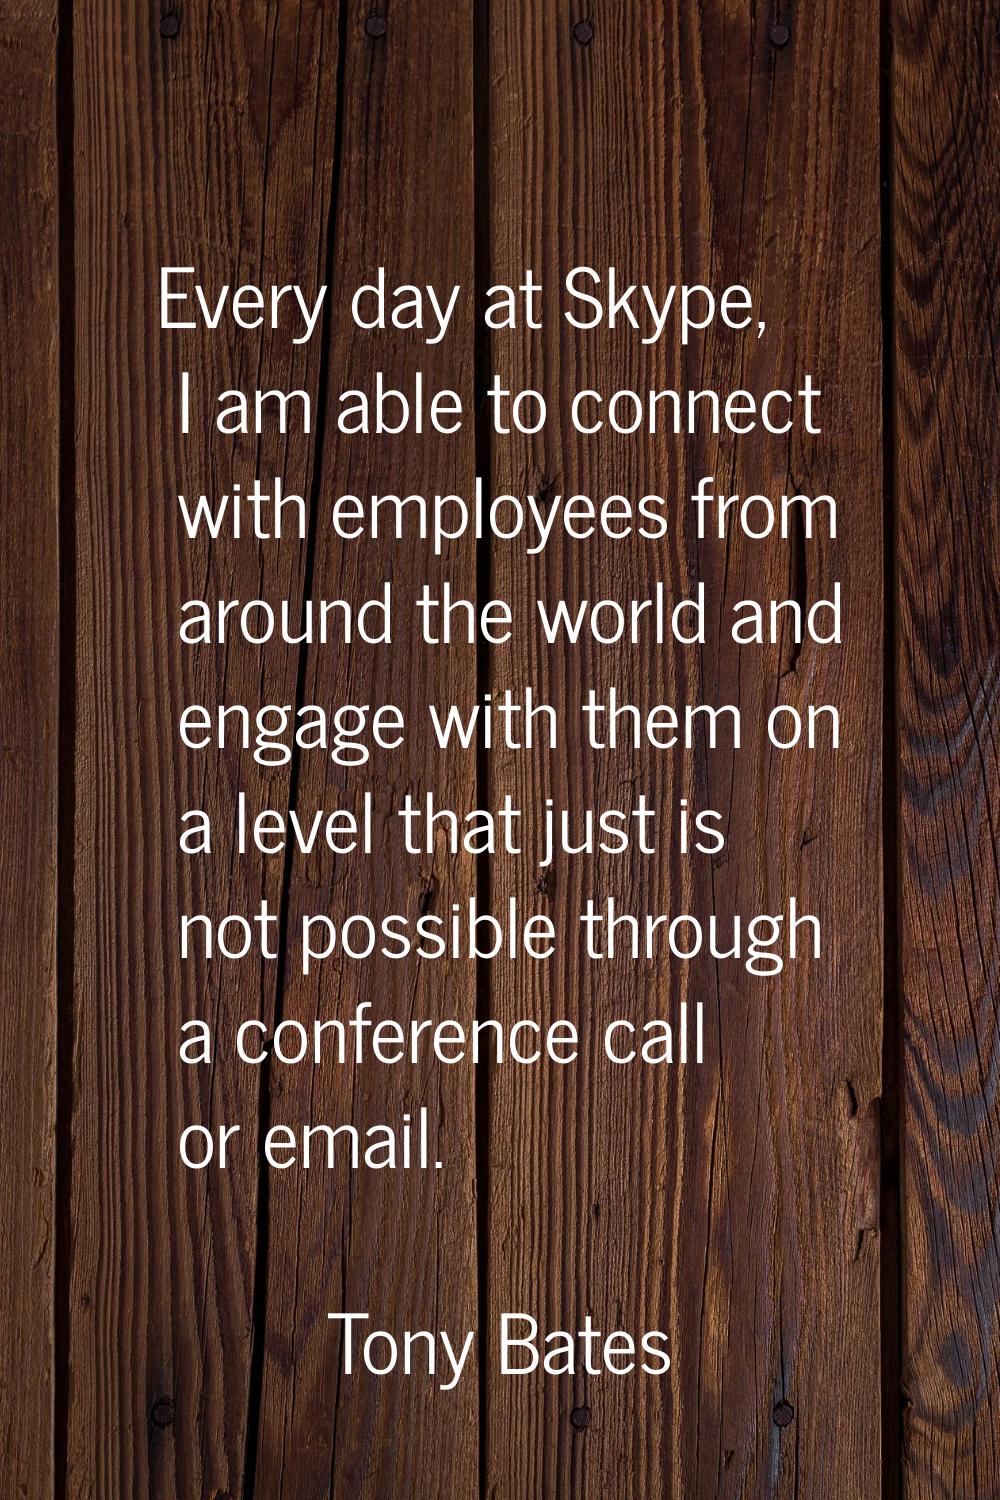 Every day at Skype, I am able to connect with employees from around the world and engage with them 